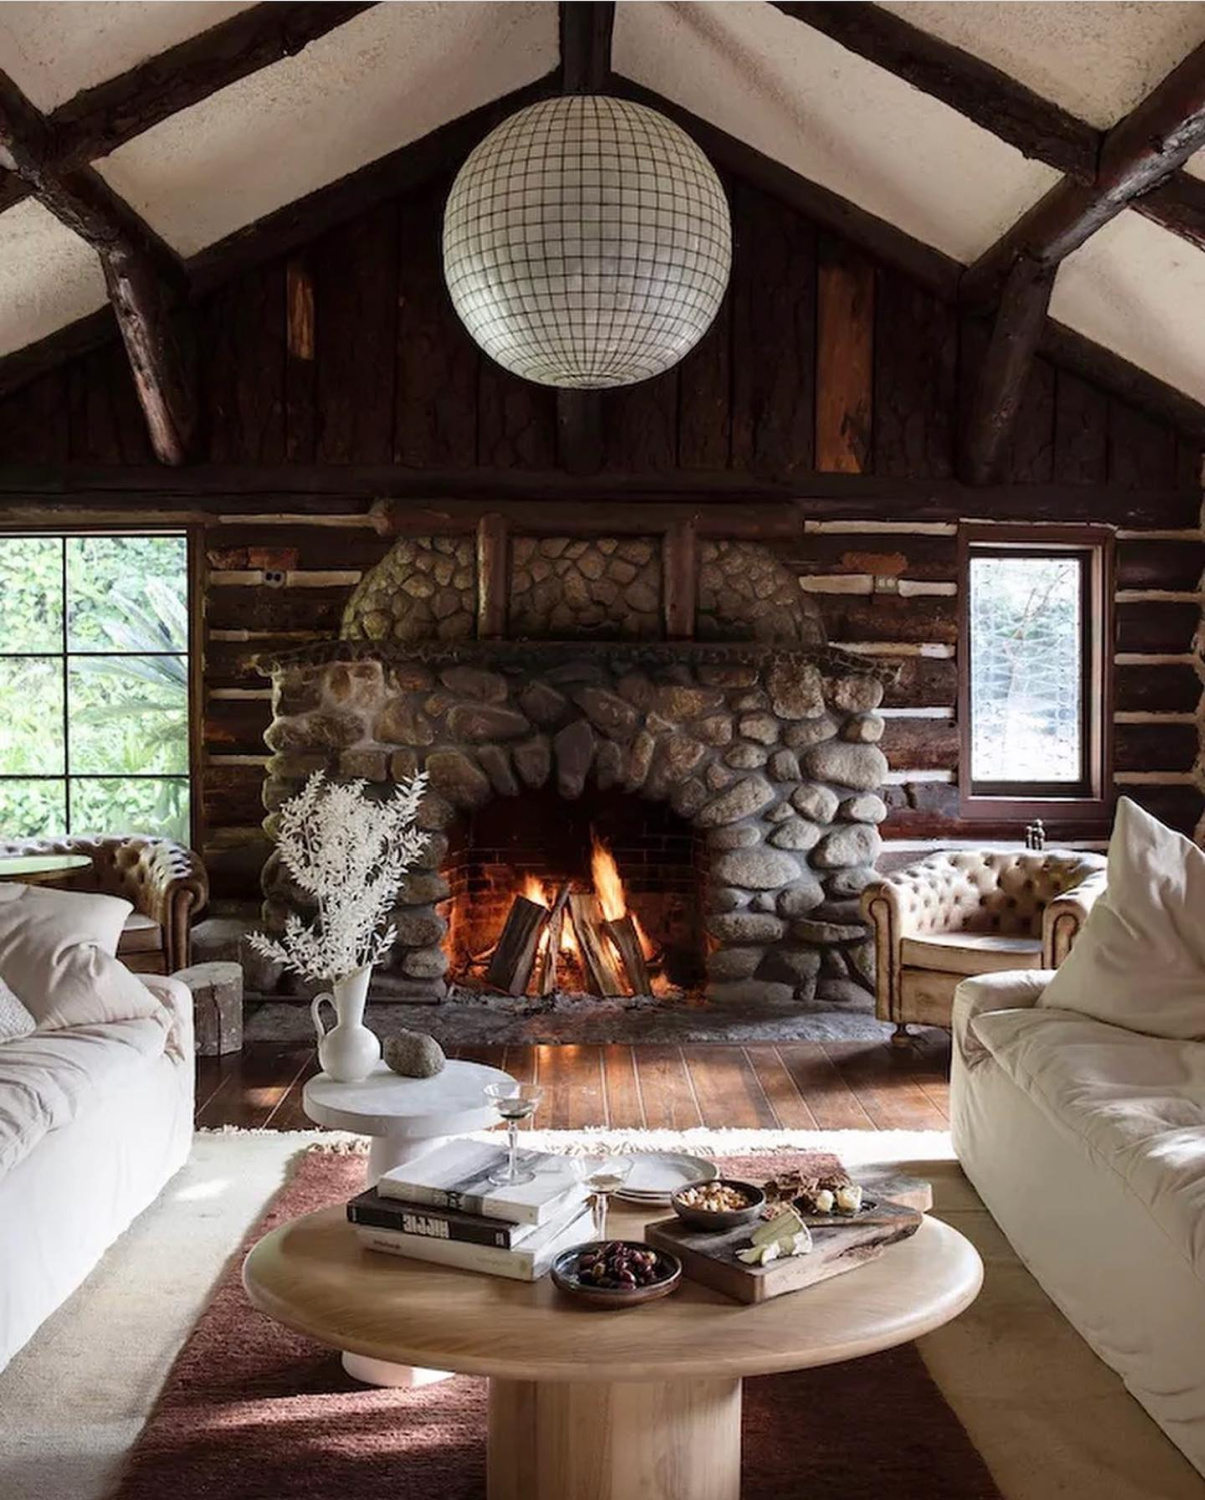 Leanne Ford designed cozy rustic cabin space with stone fireplace. #leanneford #rusticluxe #cabinvibes